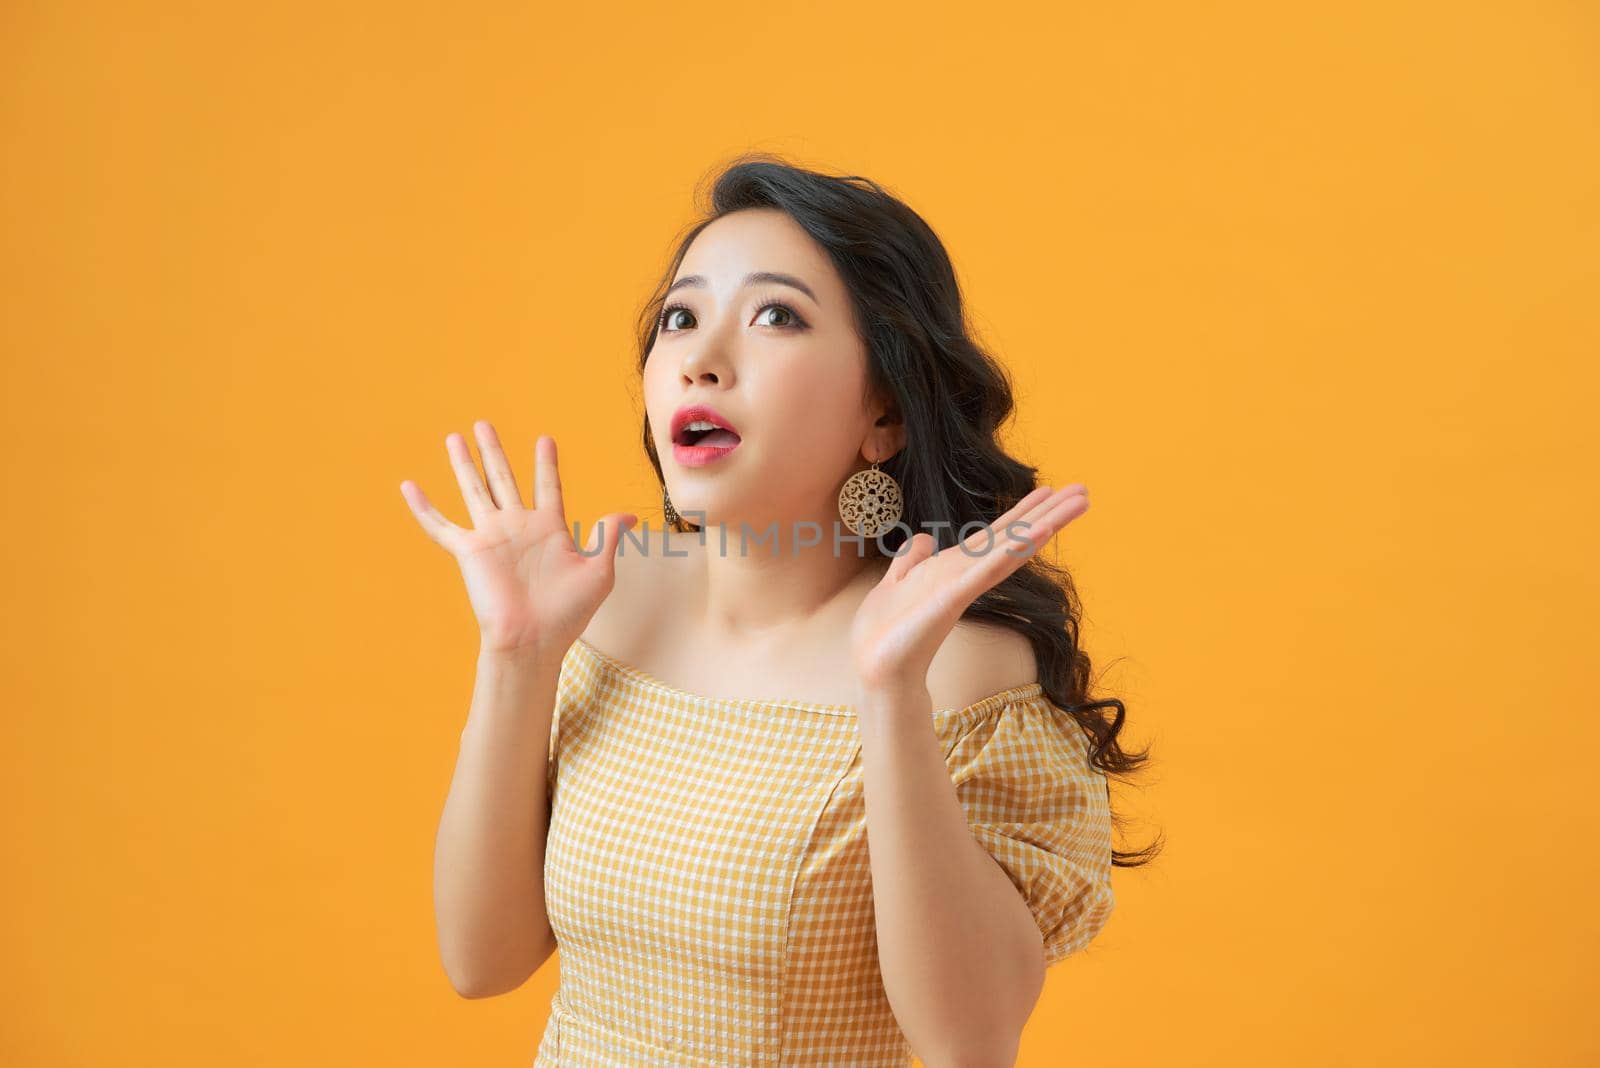 Surprised young woman shouting over yellow background. Looking at camera by makidotvn